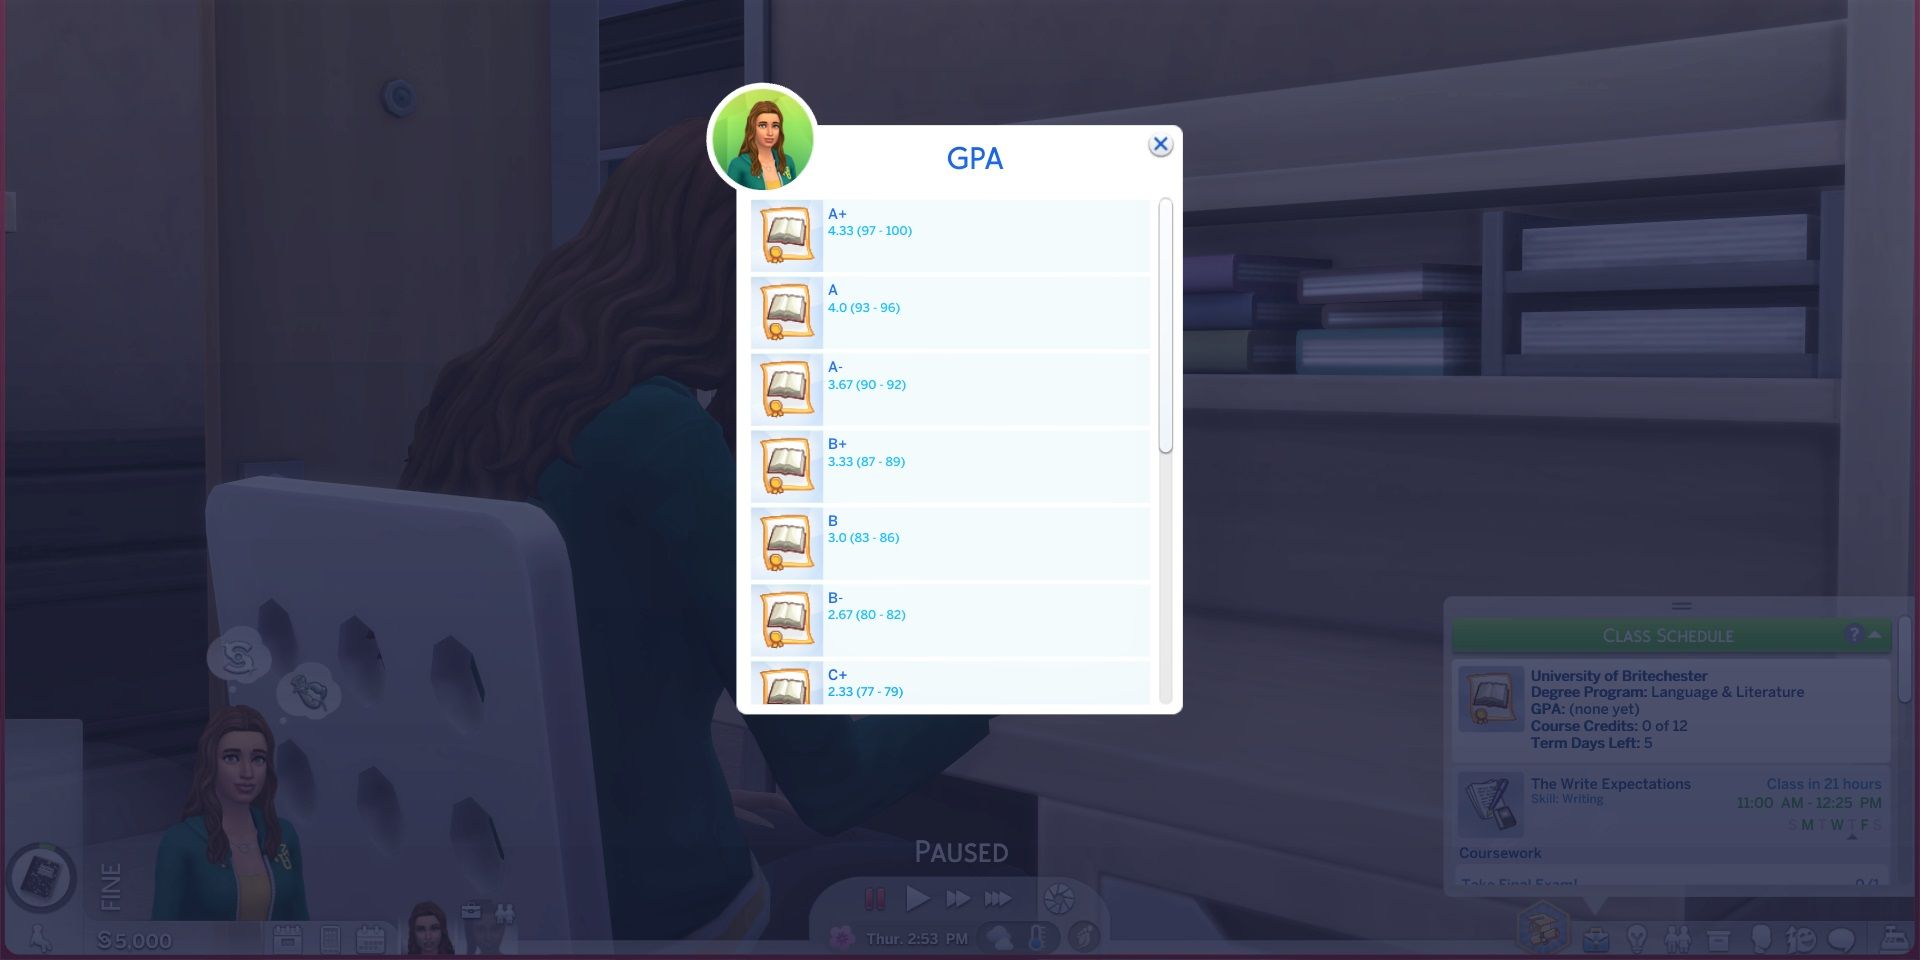 The GPA menu in UI Cheats Extension shows grades from A+ to C+.